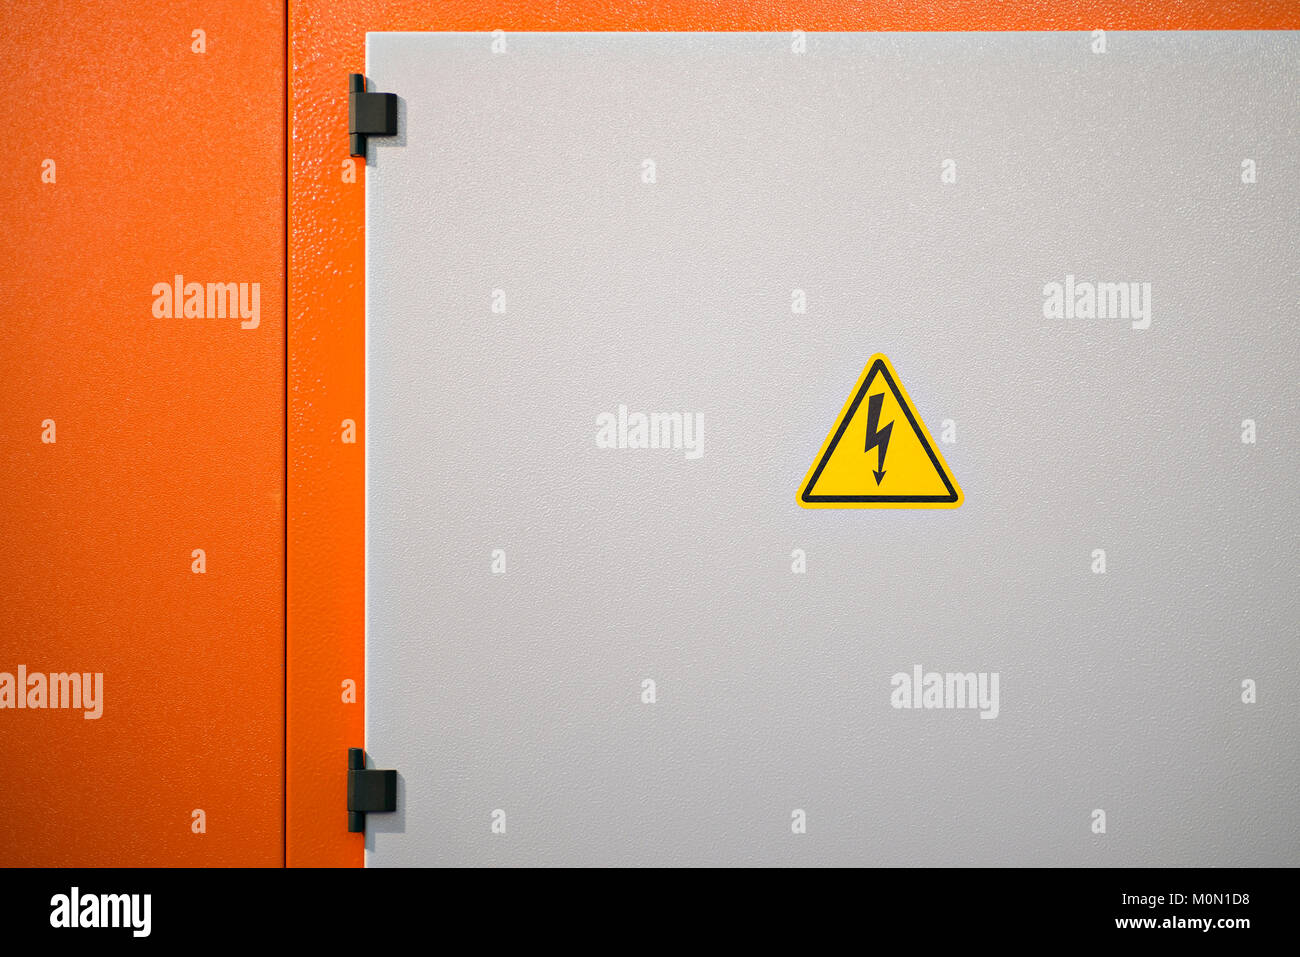 Yellow high voltage electrical hazard sign on a dangerous industrial machine in orange color Stock Photo